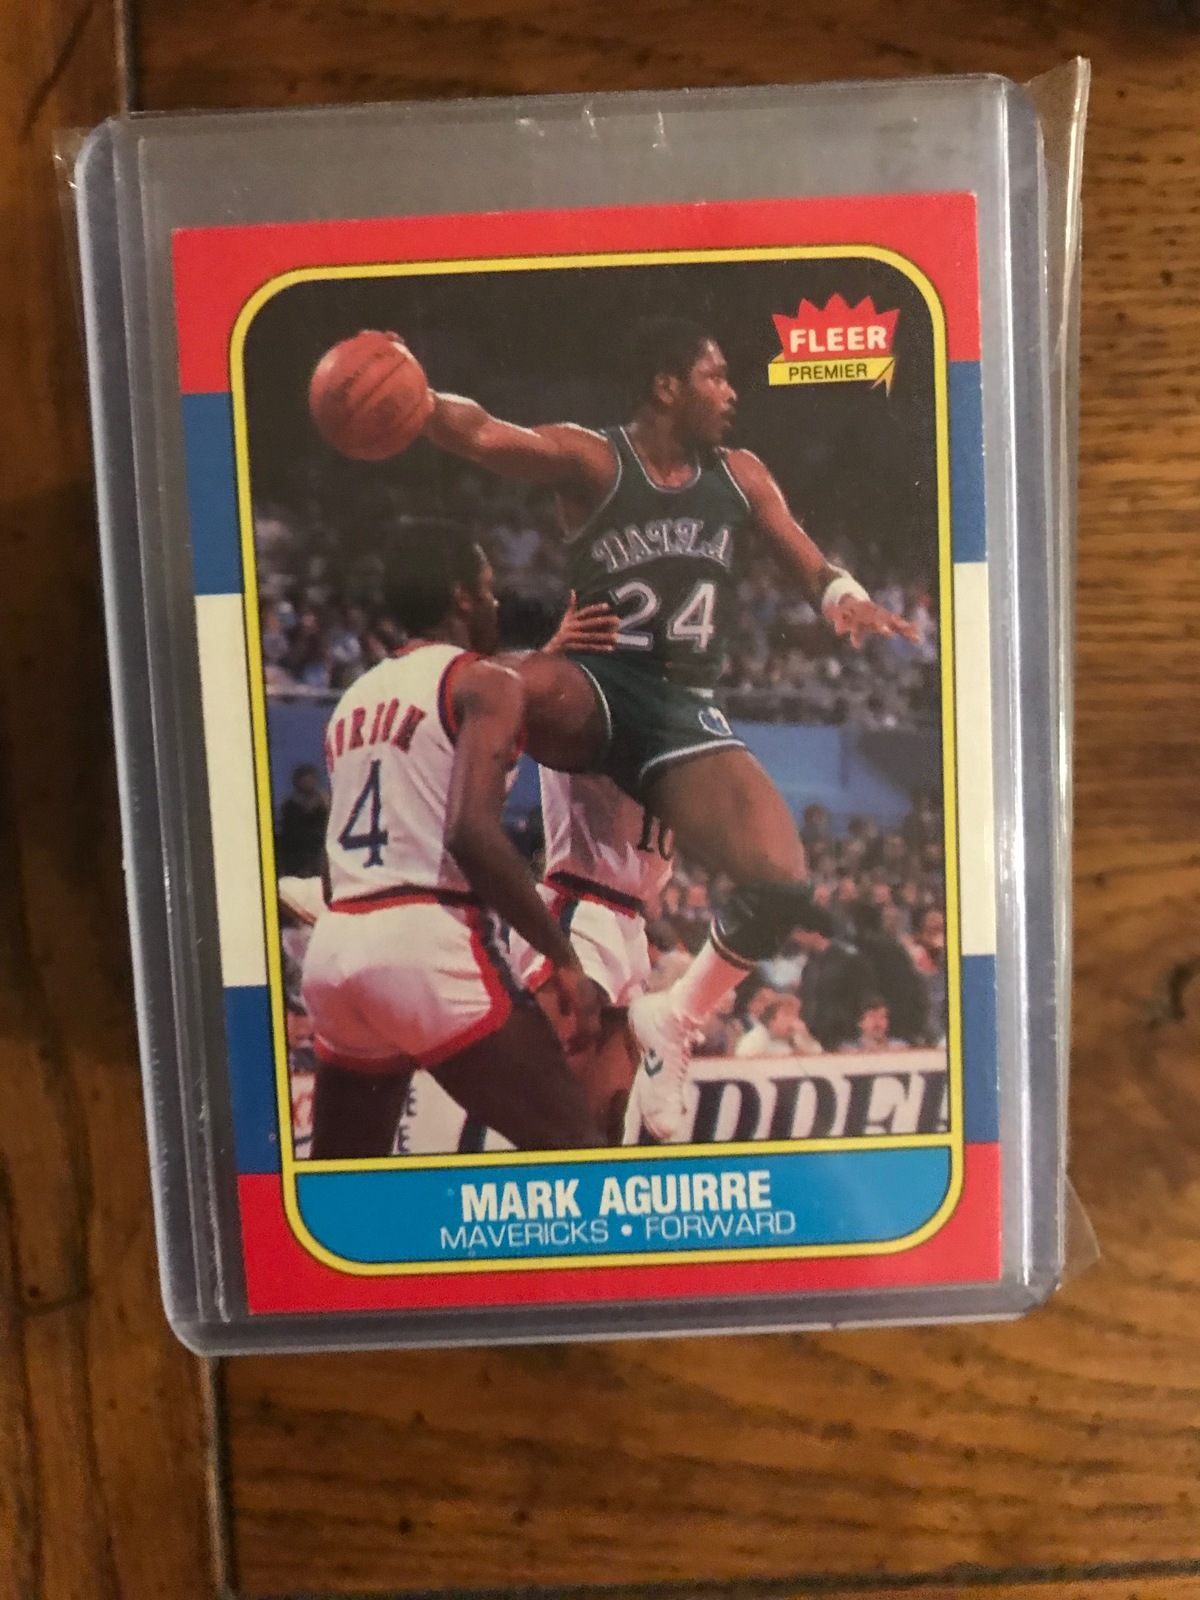 Primary image for Mark Aguirre 1986 Fleer Basketball Card   (01234)